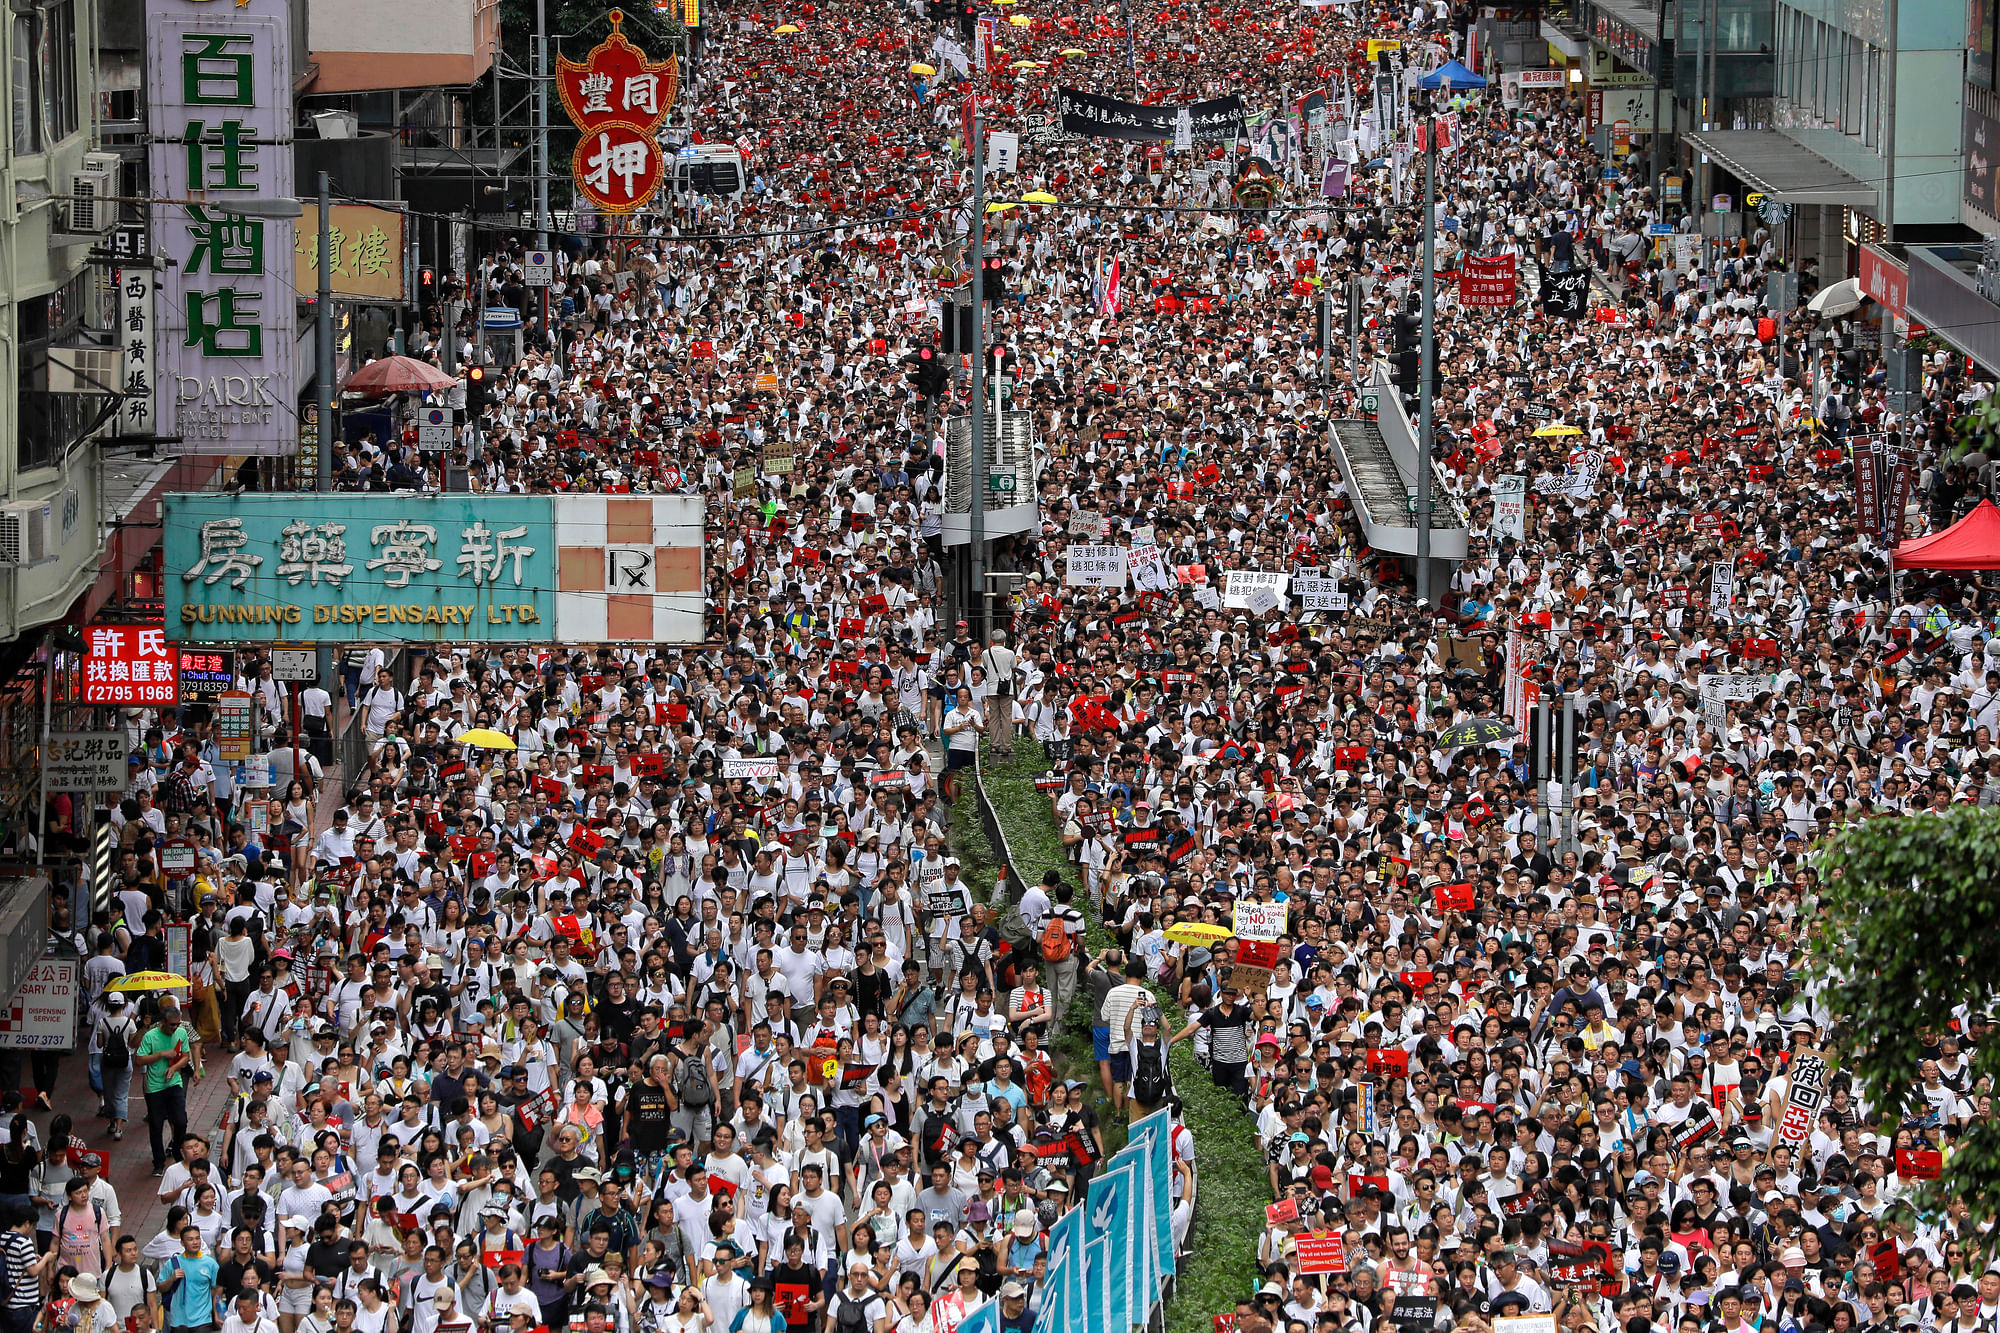 Protesters march against the proposed amendments to Hong Kong’s extradition law.